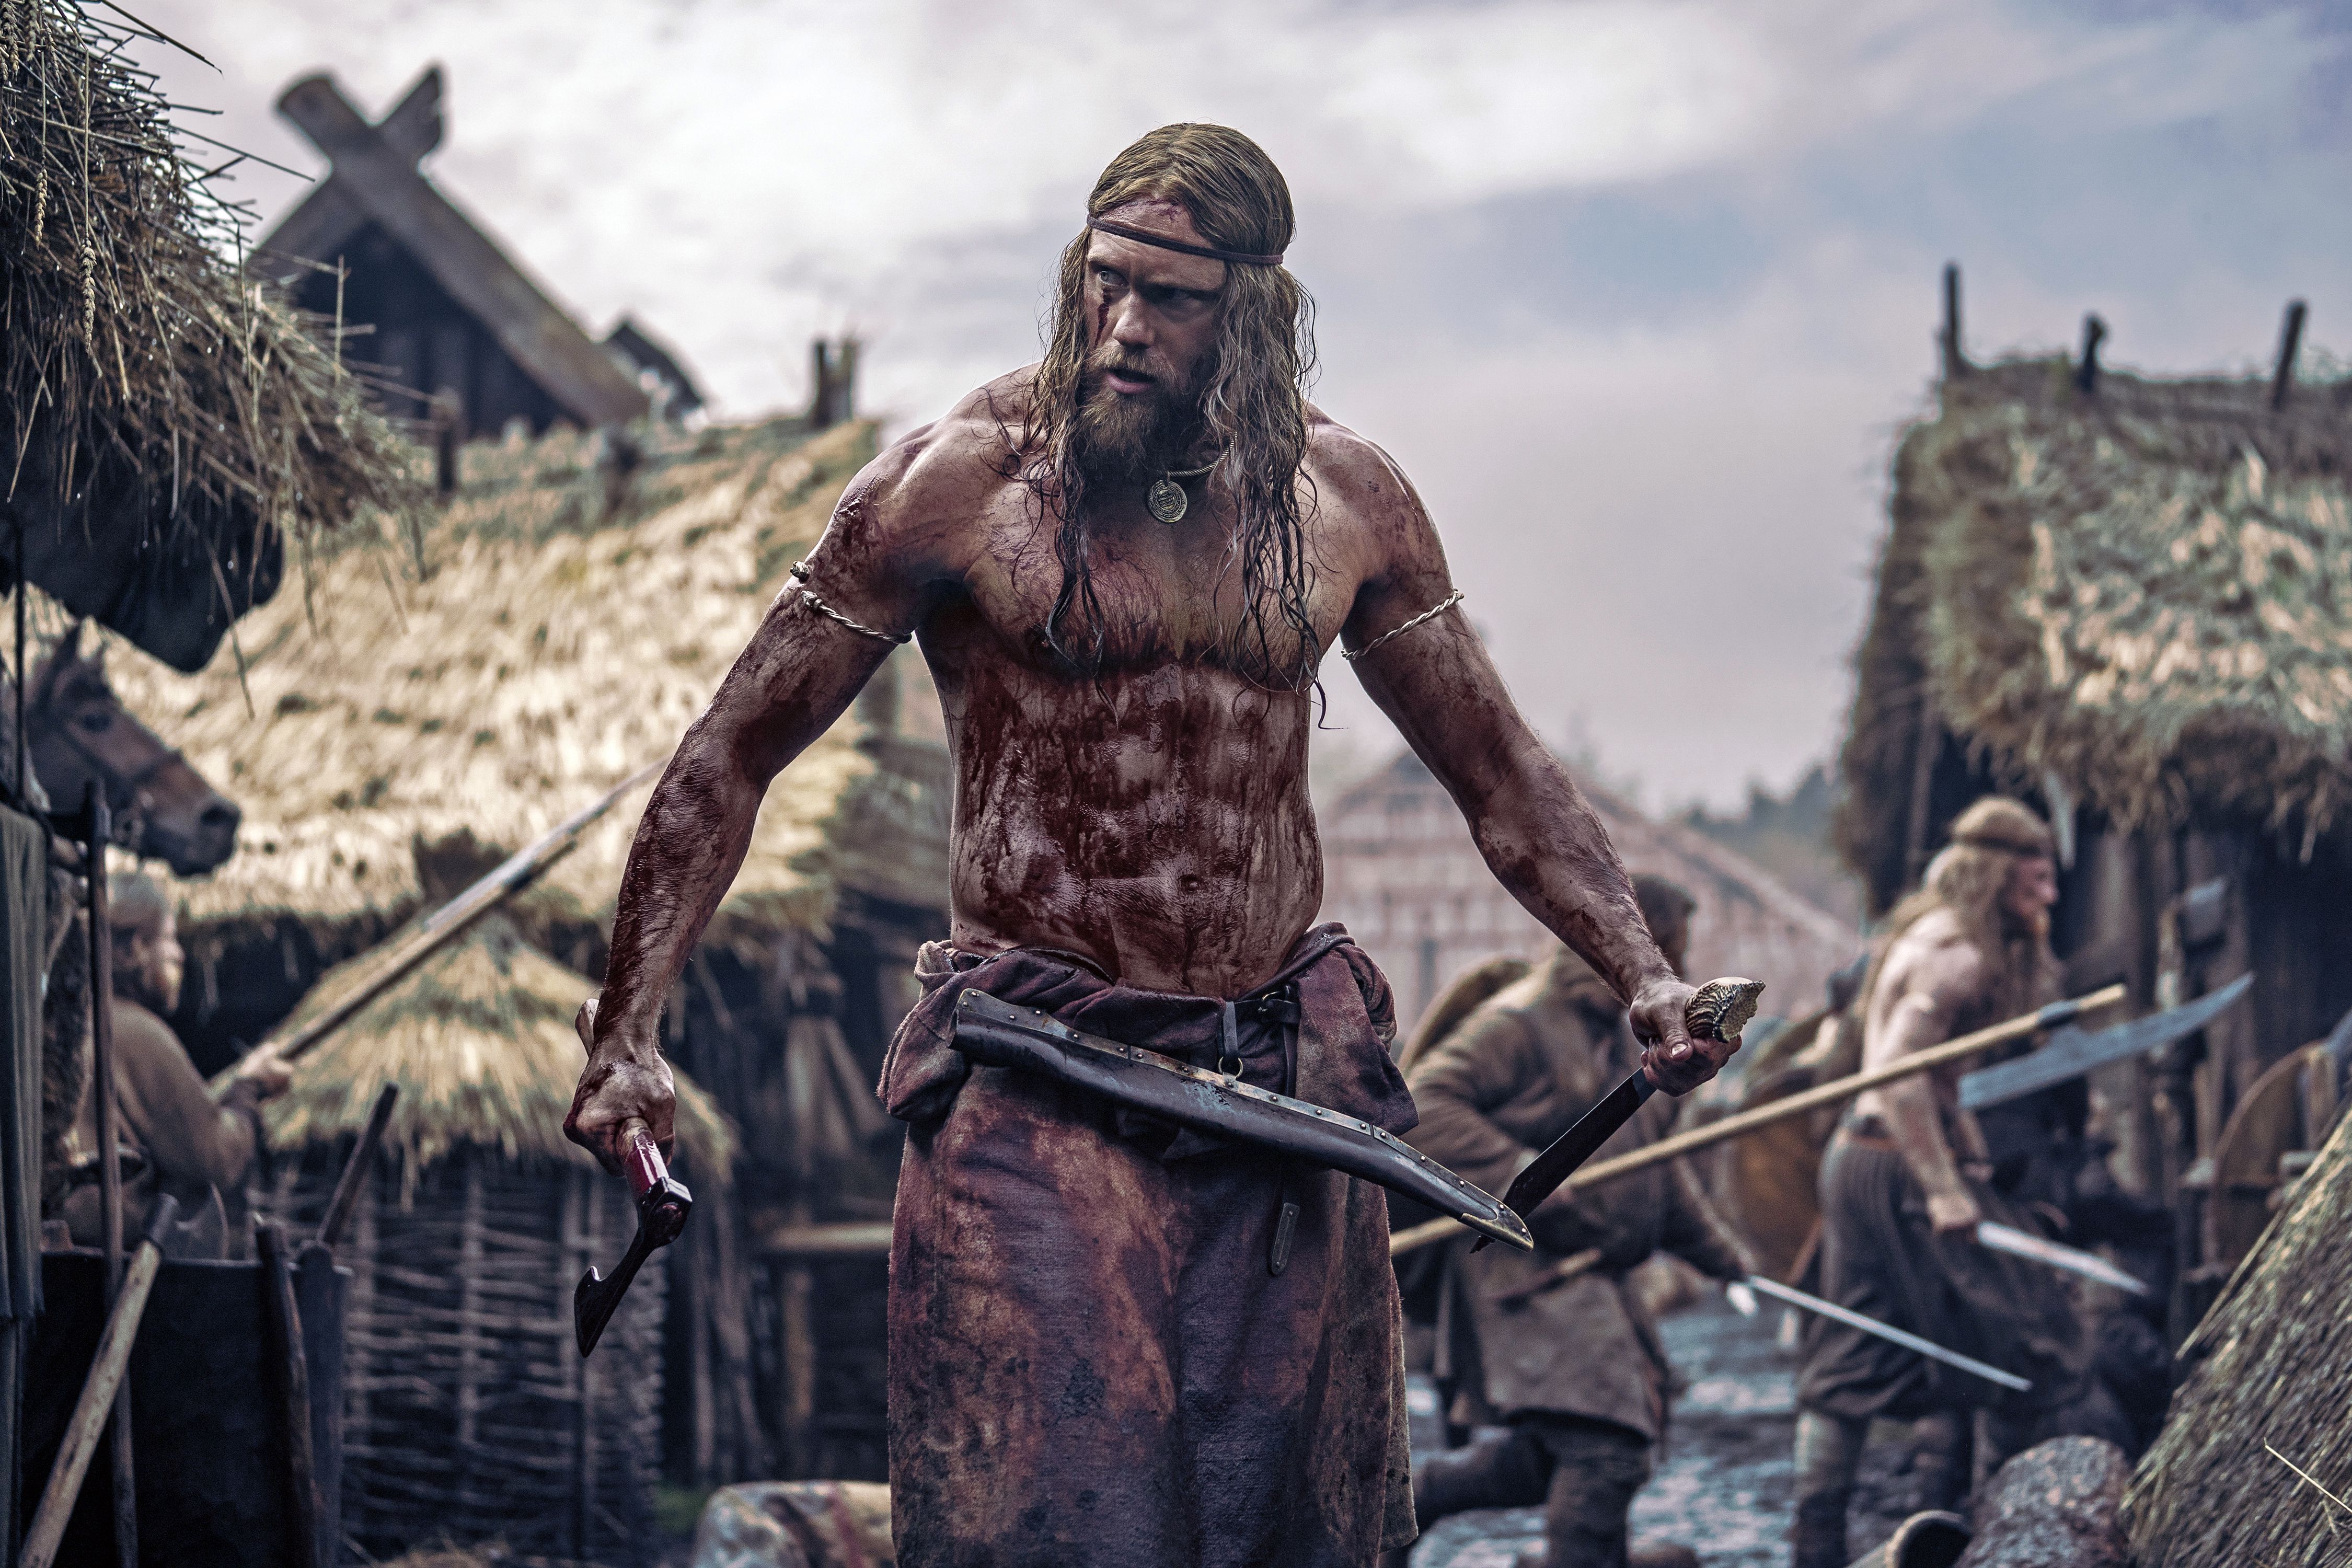 The Northman Streaming Guide - Where to Watch the 2022 Movie